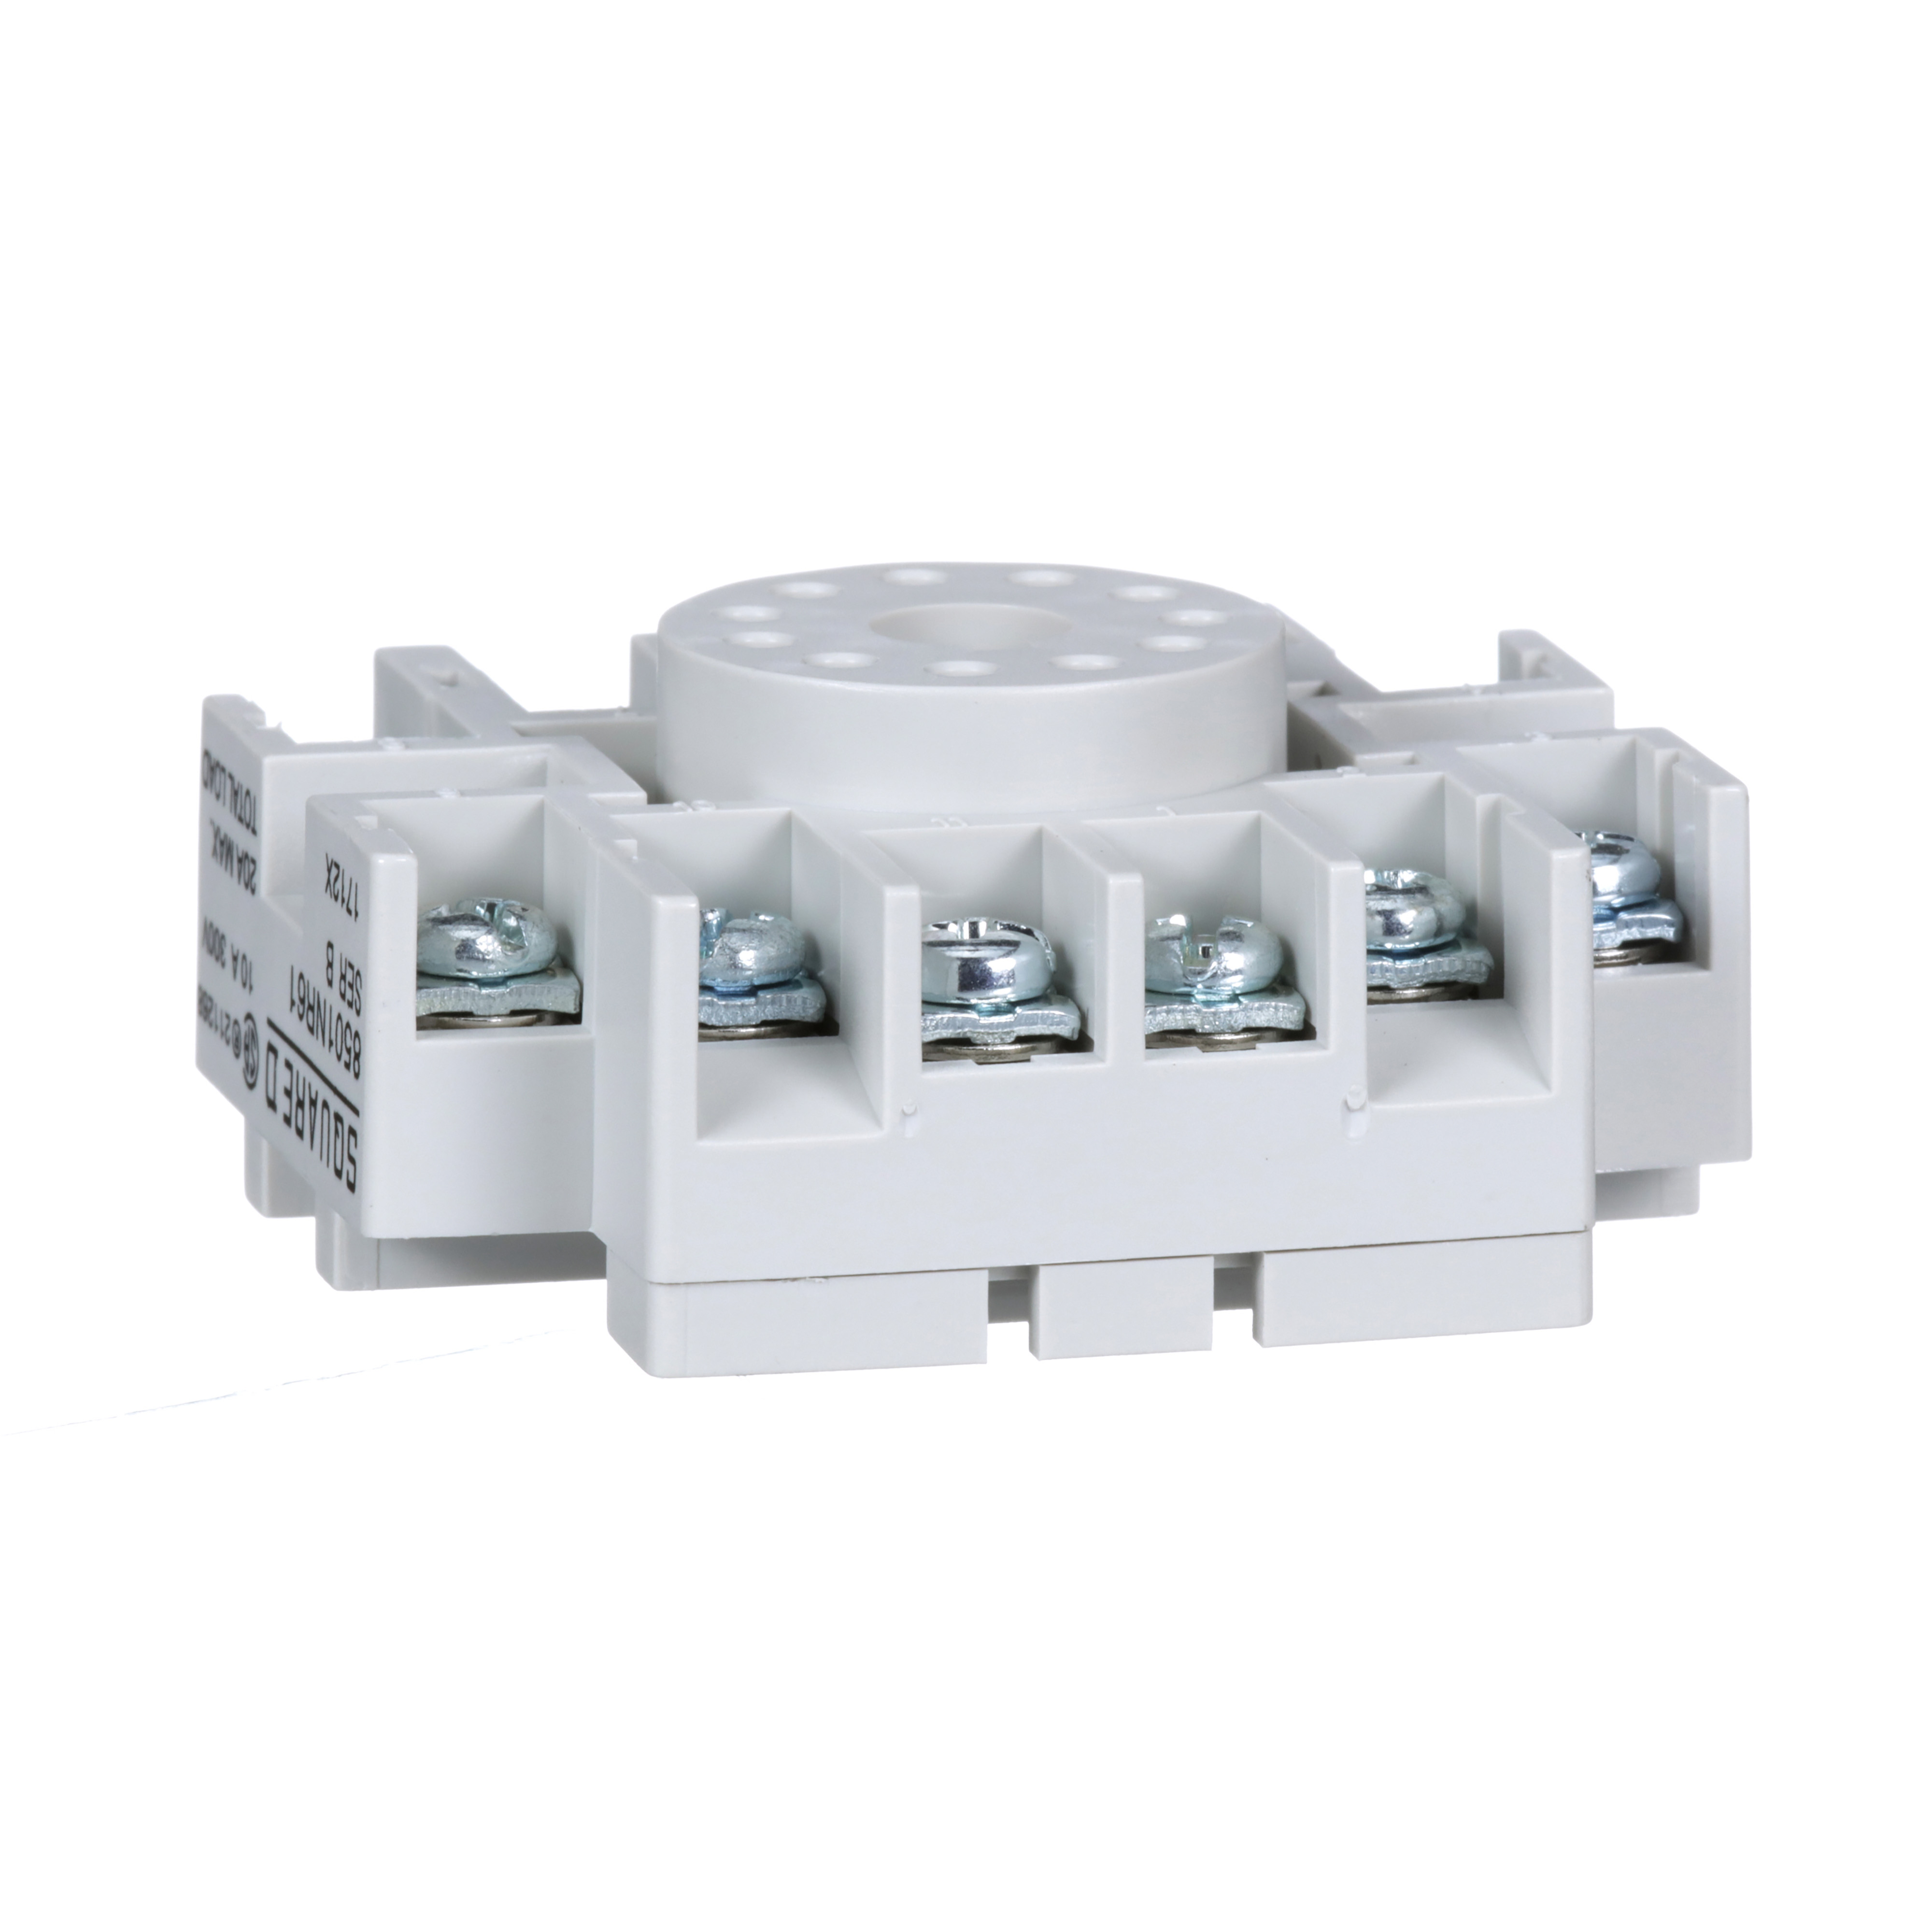 Plug in relay, Type N, relay socket, 11 tubular pin, single tier, for 8510KP relays and 9050JCK timers